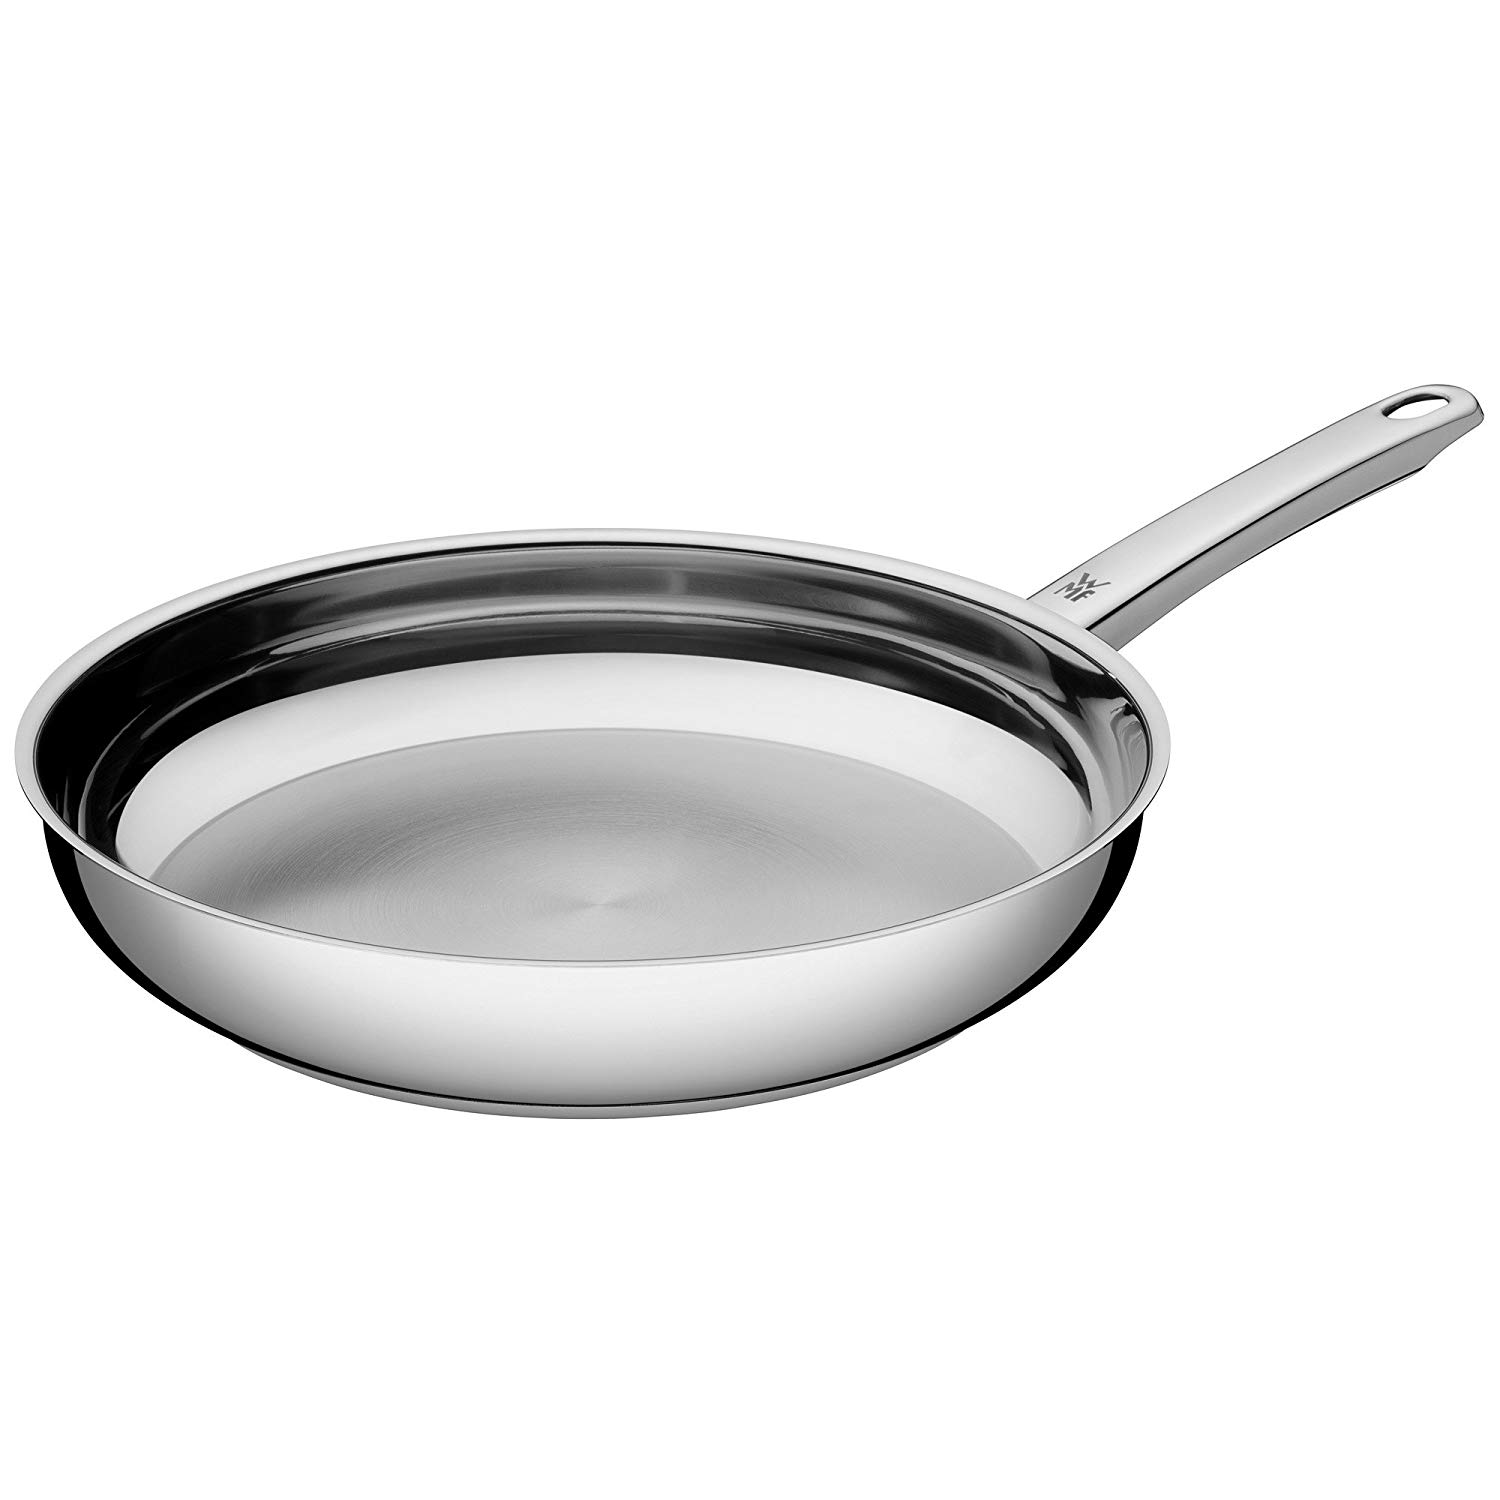 Wmf Favorit Frying Pan Cromargan Stainless Steel Polished Suitable For Indu